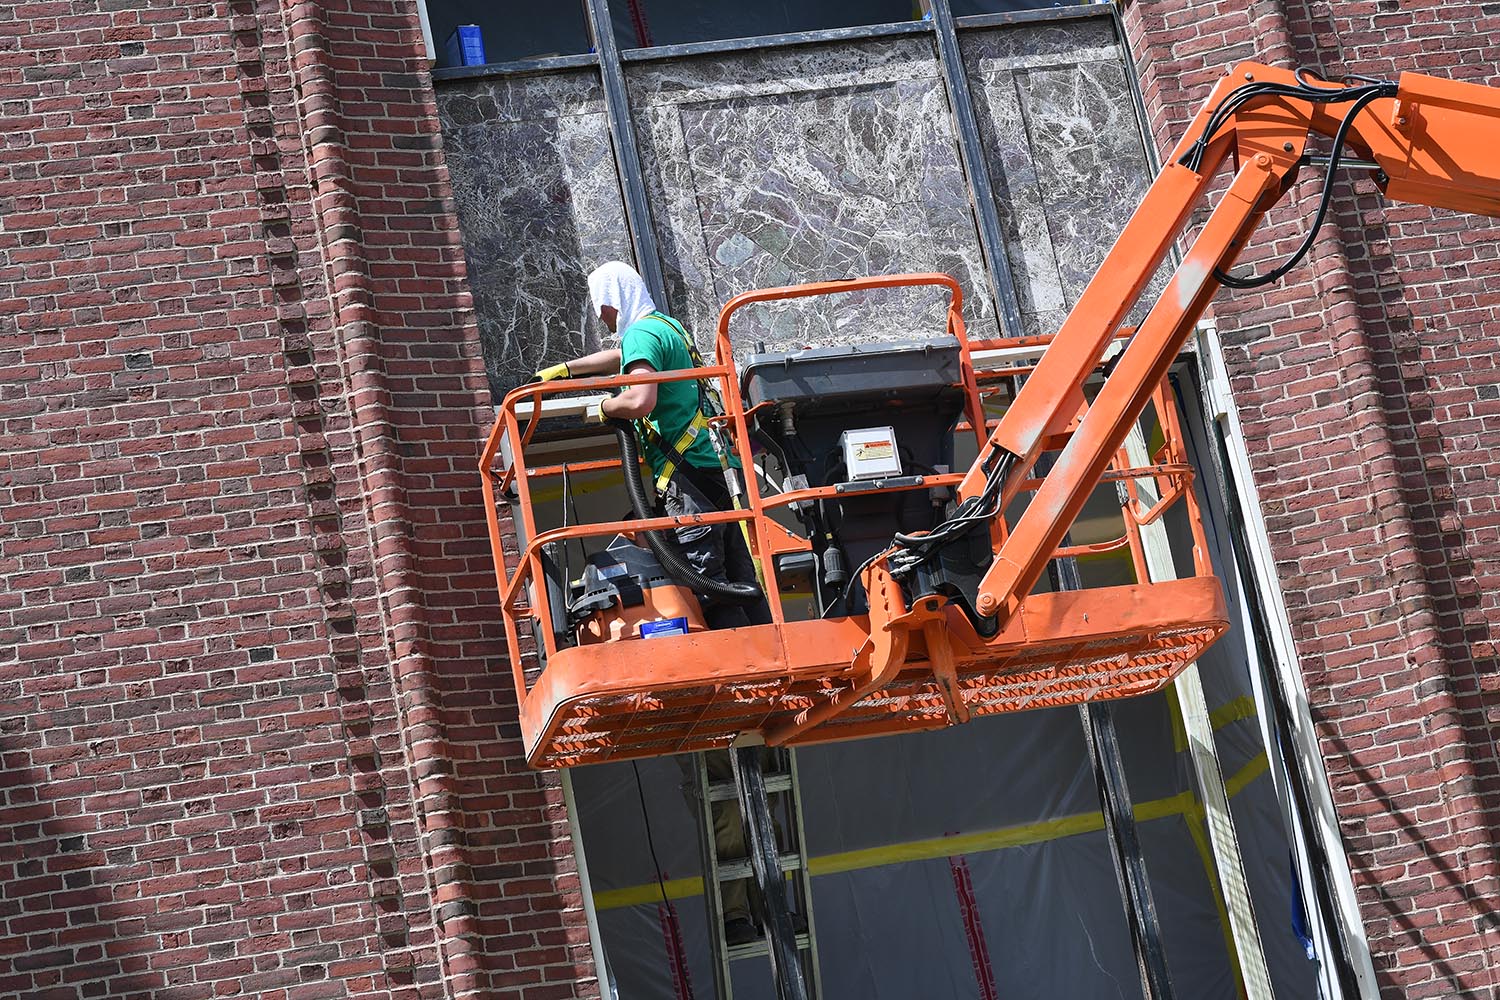 This summer, crews are working on restoring and repairing windows at Olin Library.